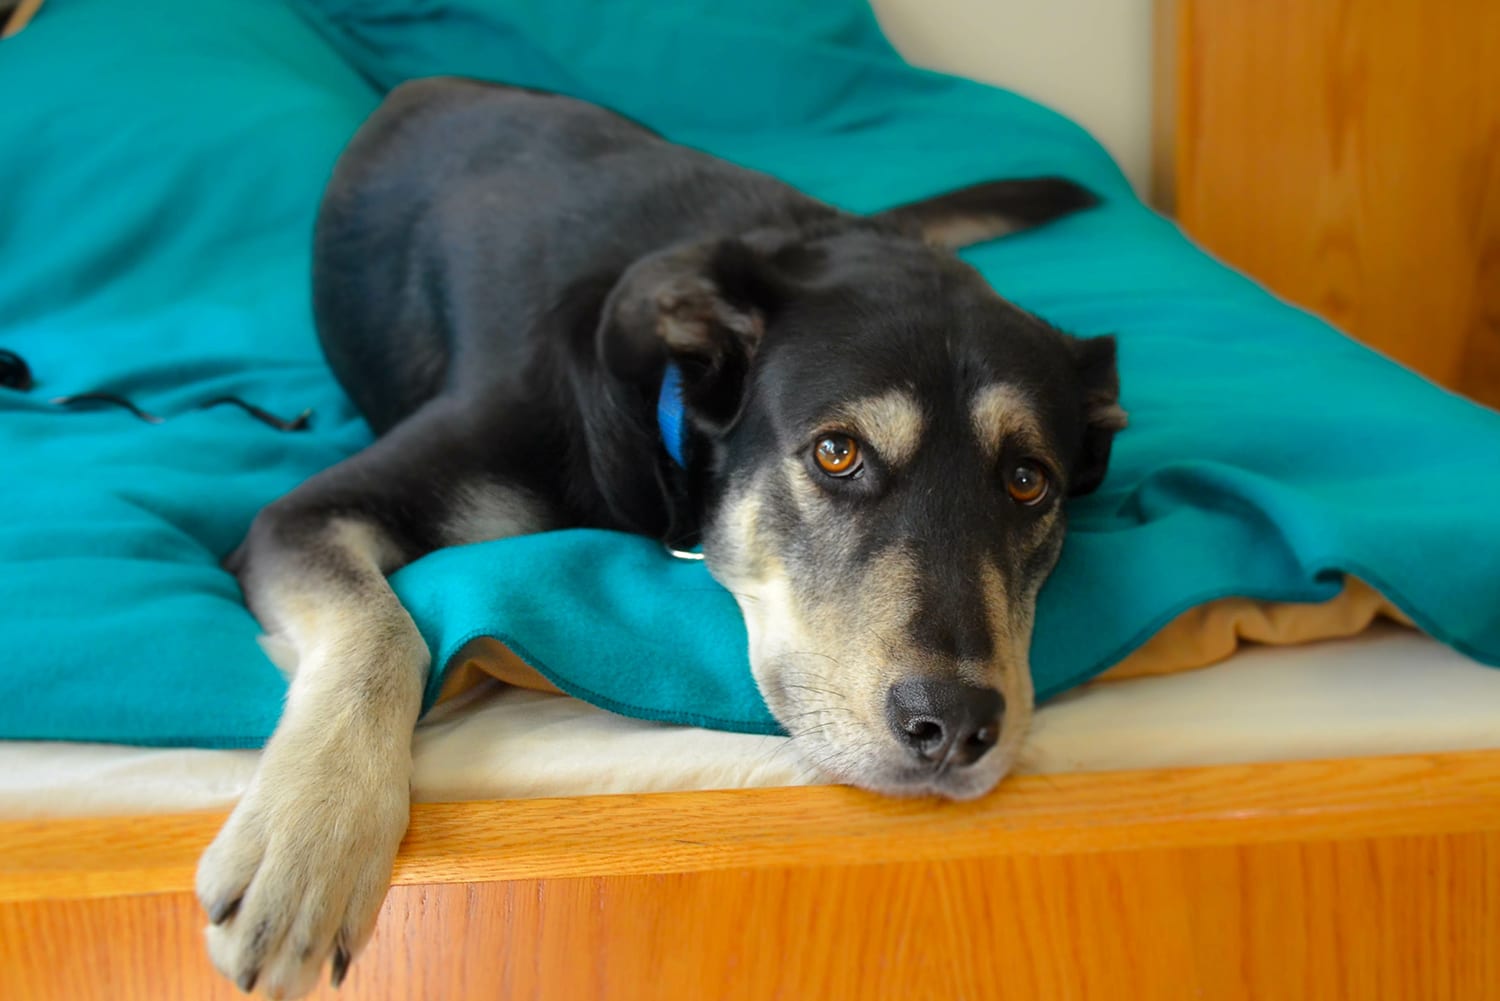 Sad looking dog flopped on a blue bed, looking into the camera. Can dogs eat bones?